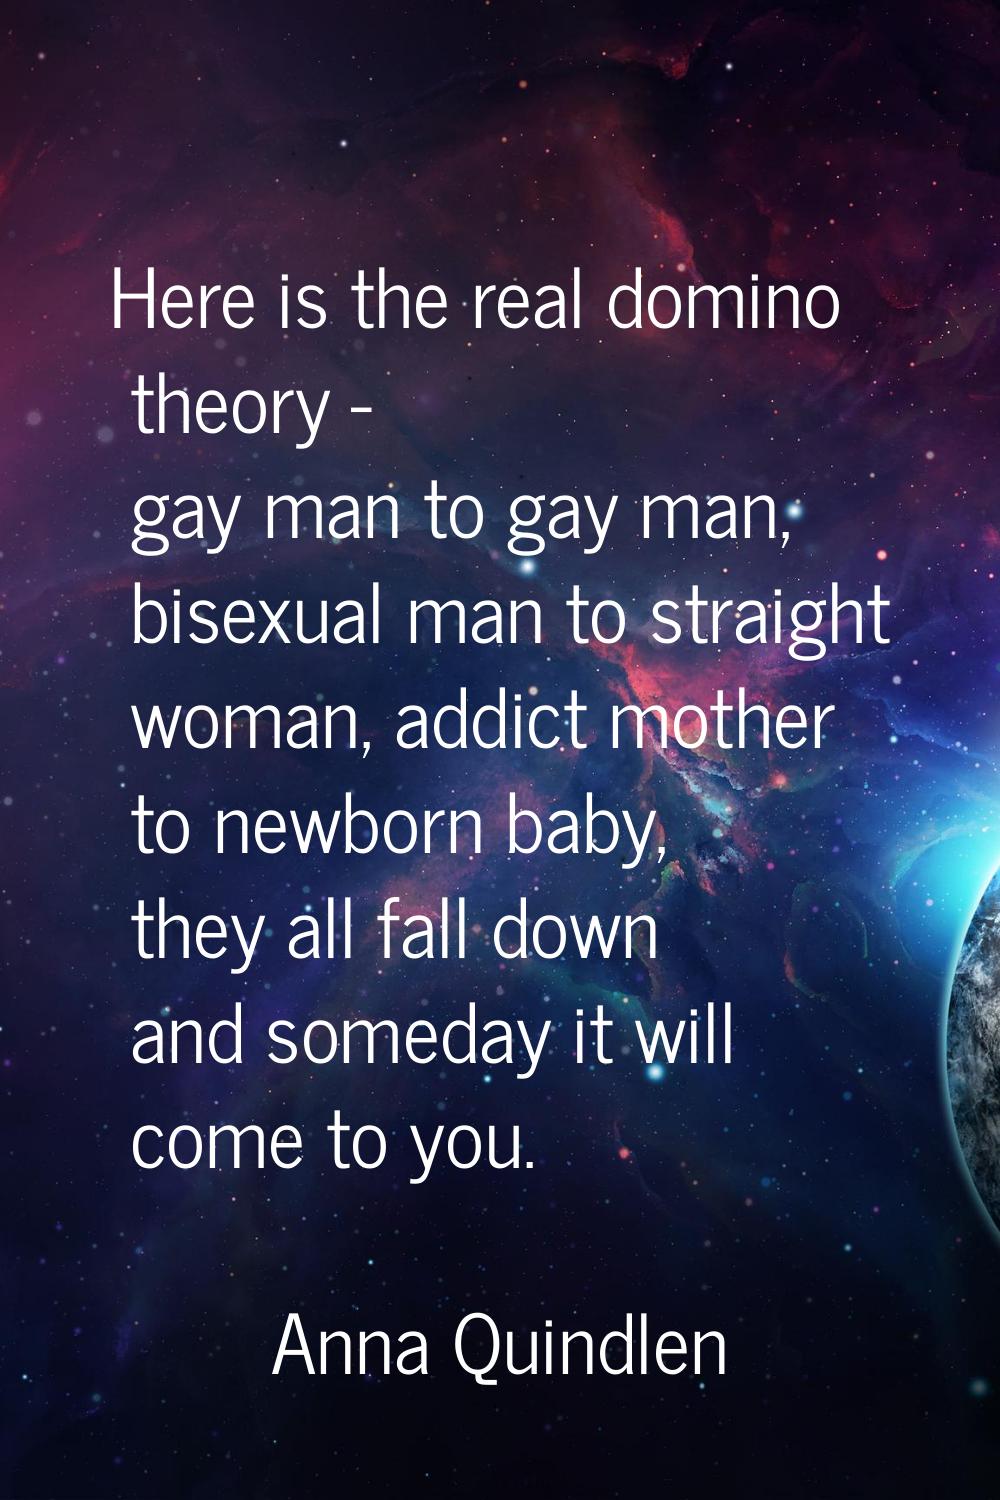 Here is the real domino theory - gay man to gay man, bisexual man to straight woman, addict mother 